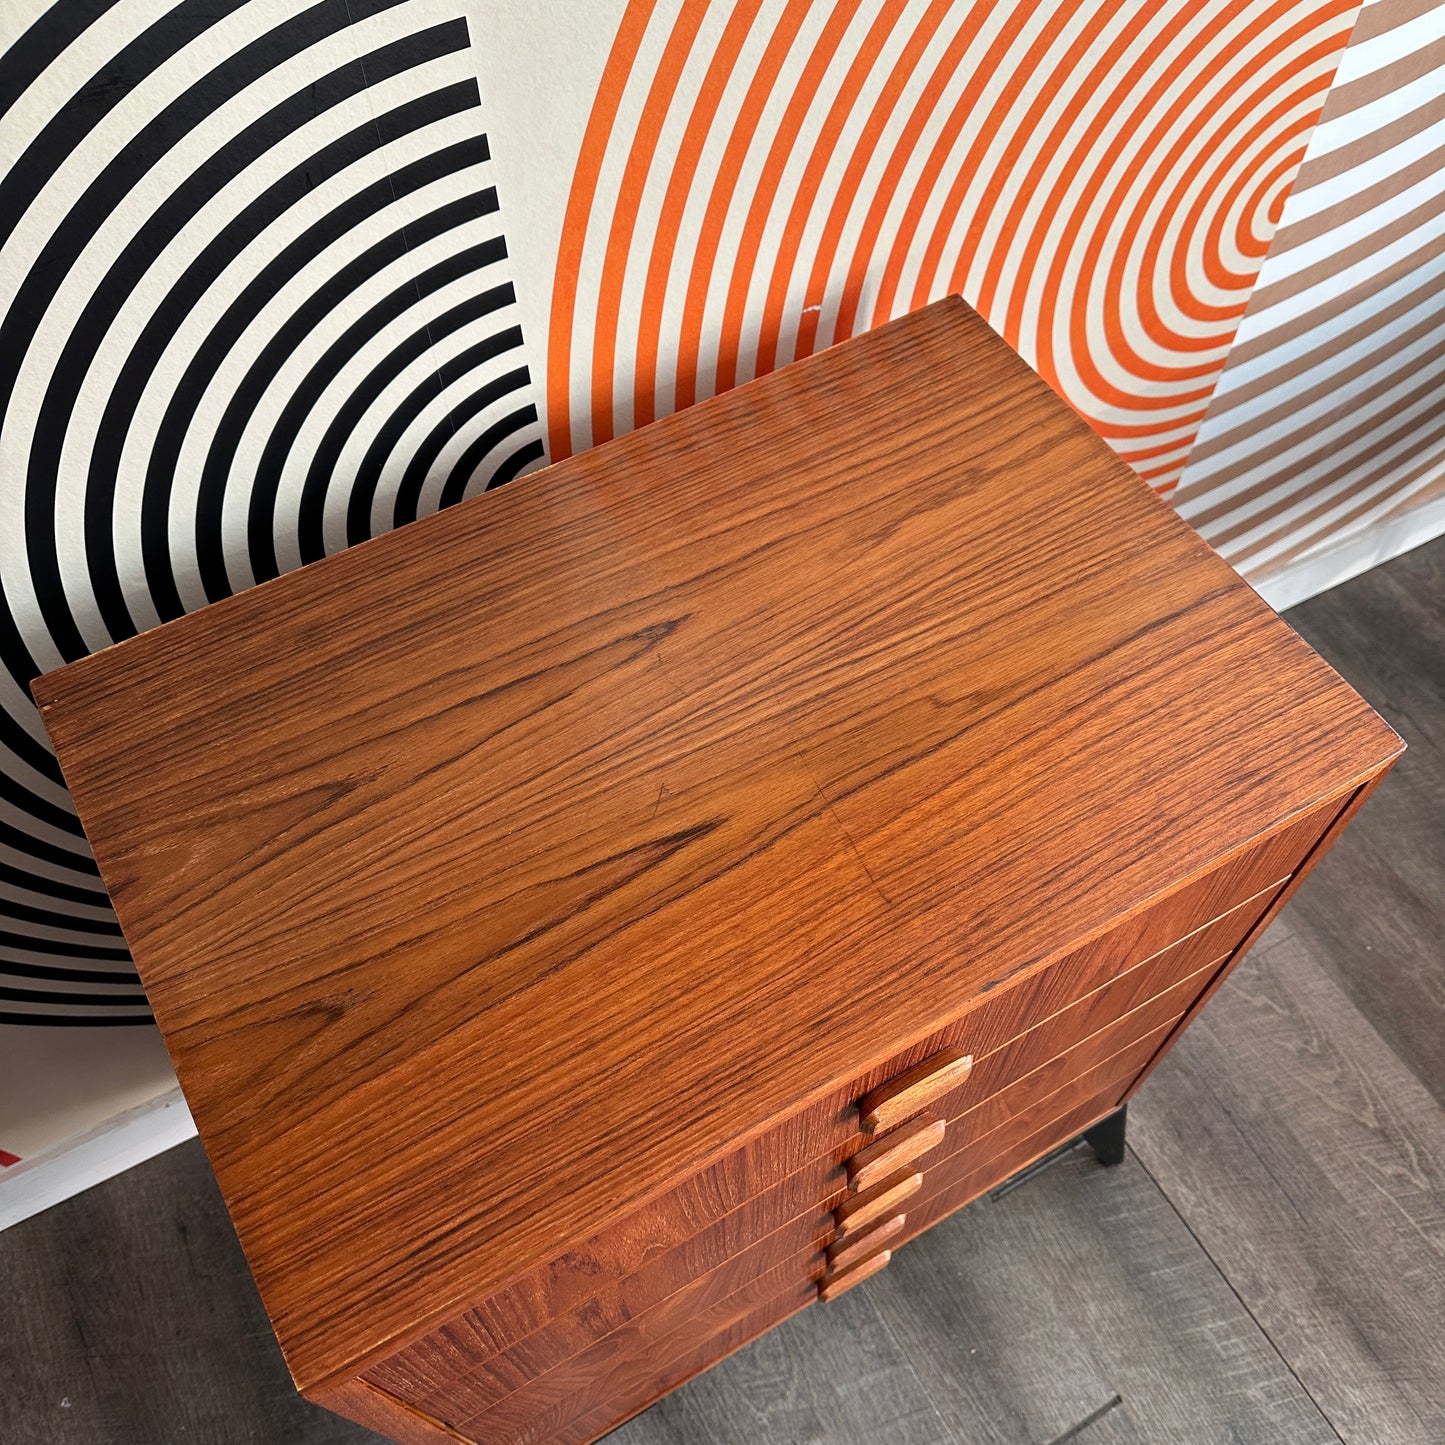 Small Teak Chest of Drawers